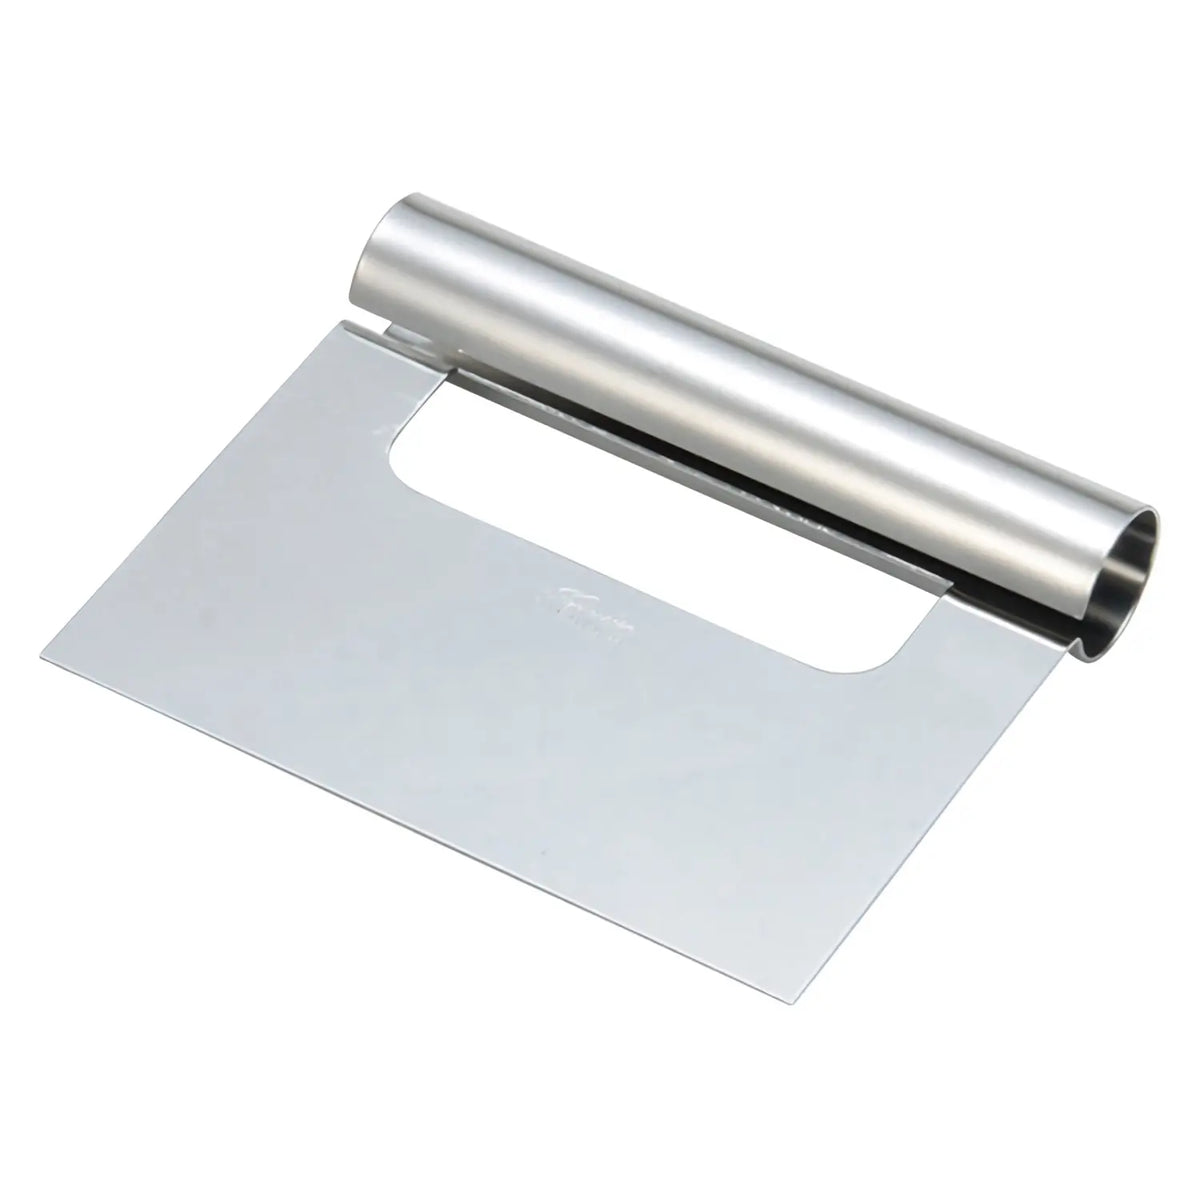 TIGERCROWN Cake Land Stainless Steel Bench Scraper